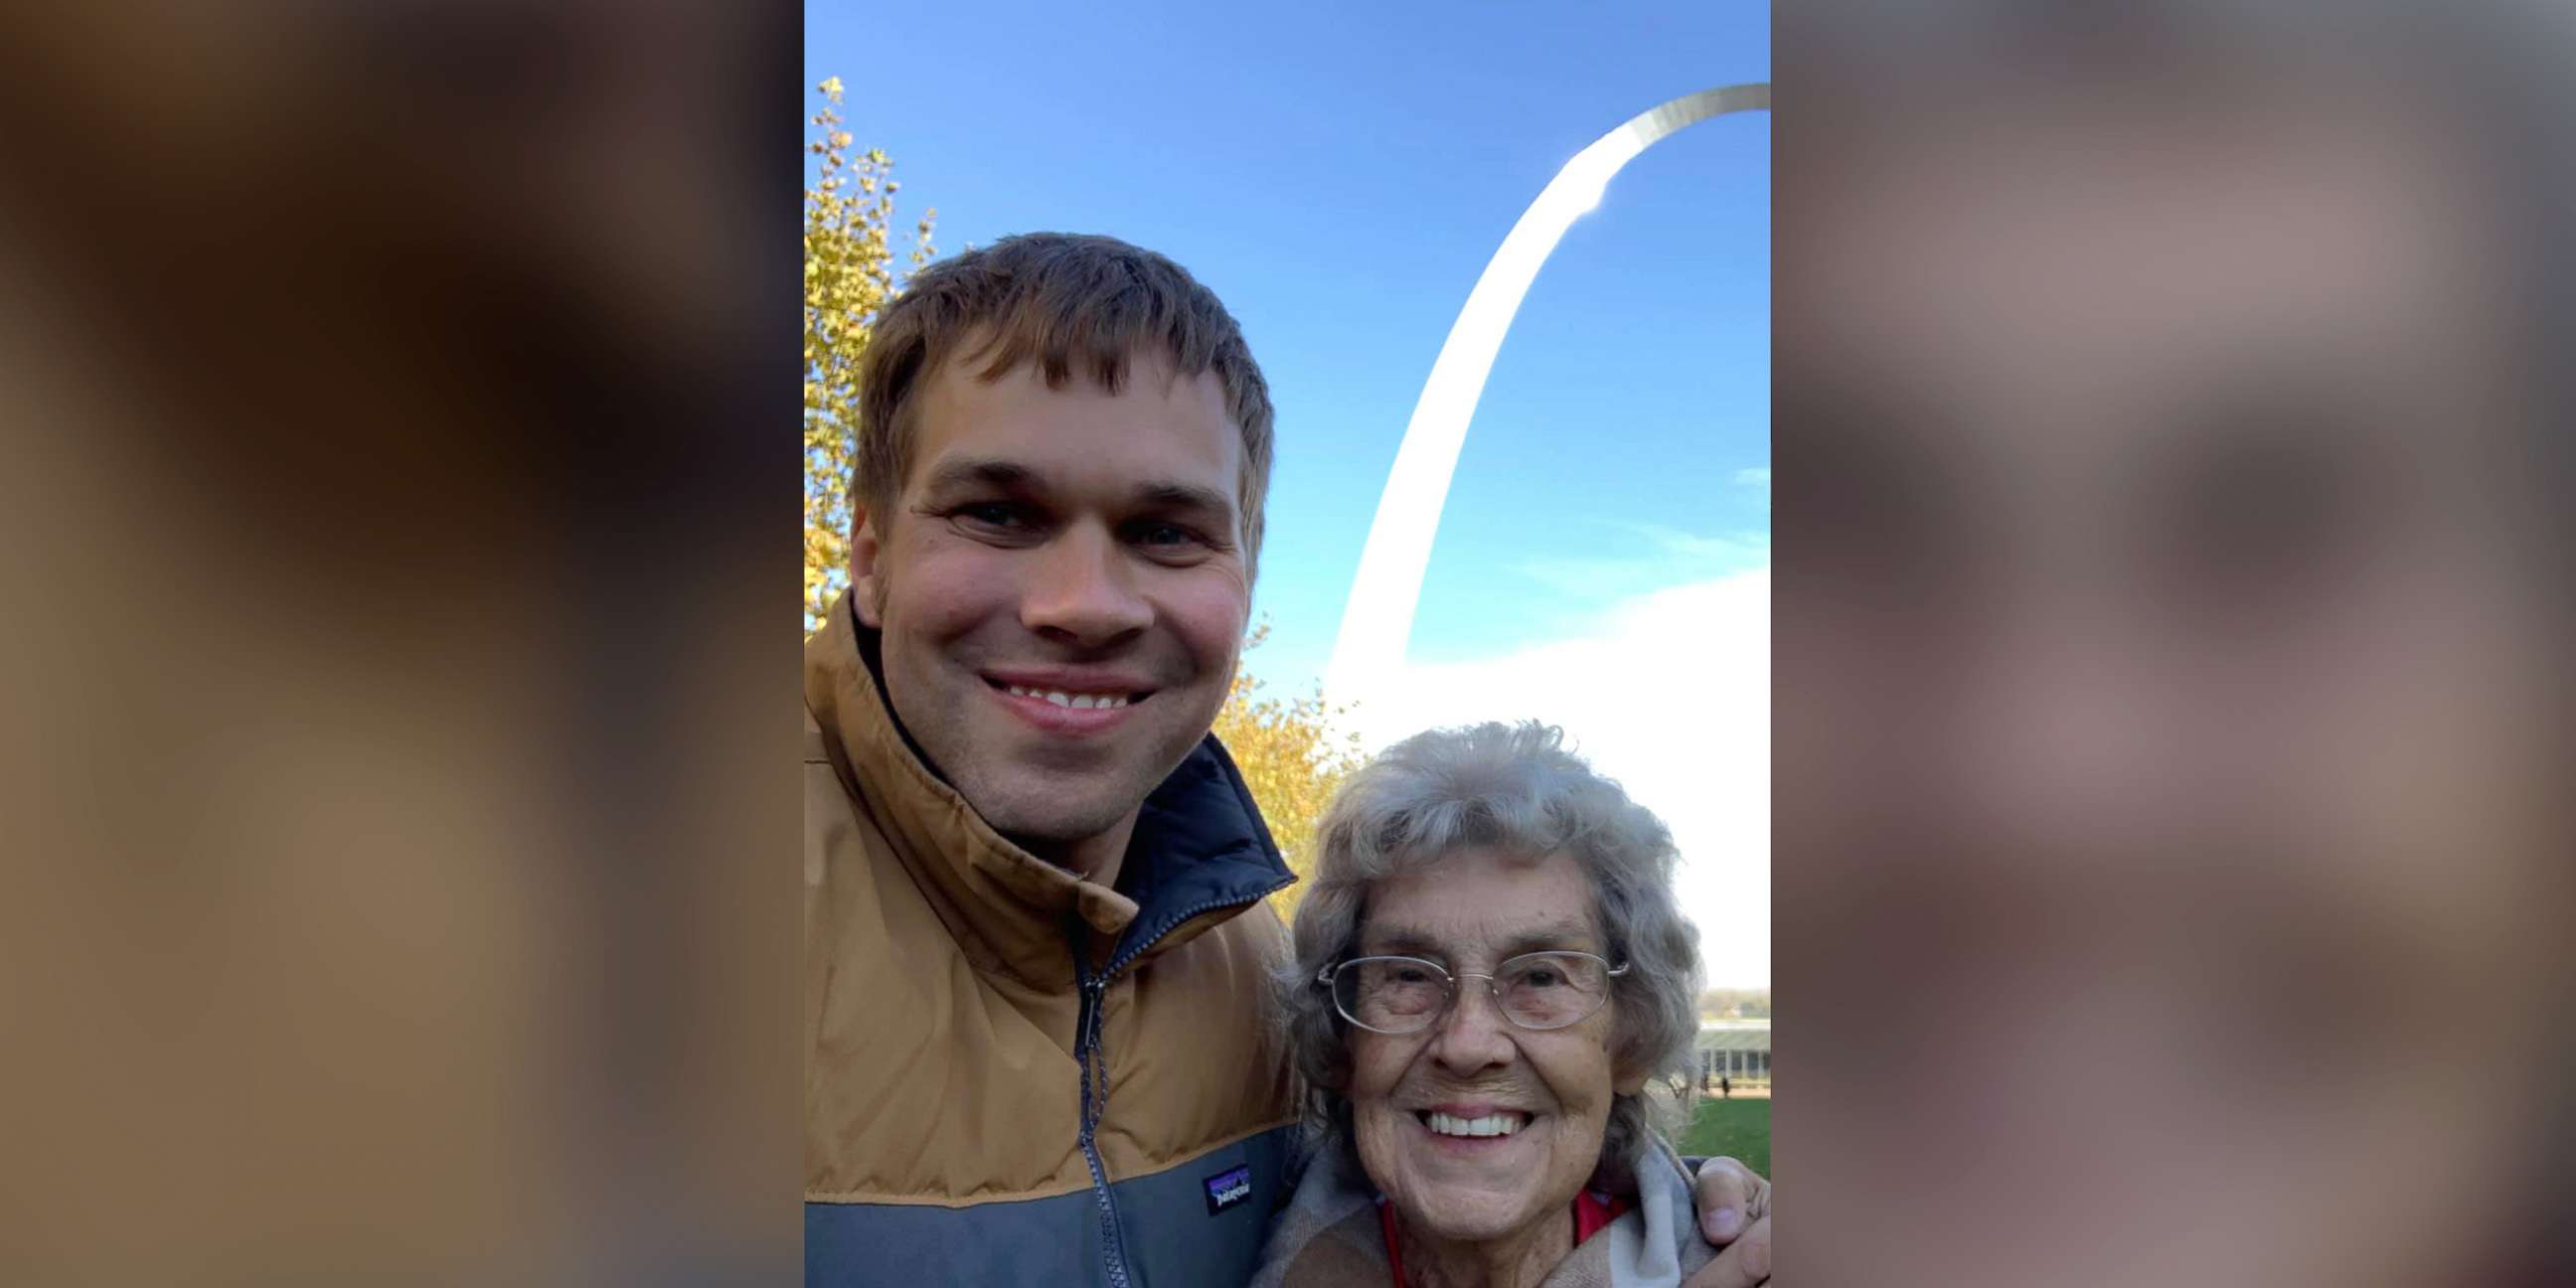 PHOTO: Brad Ryan and his grandmother Joy have spent the last four years traveling more than 40,000 miles and visiting 49 national parks in 41 states including the Gateway Arch, Hot Springs, Big Bend and Death Valley.